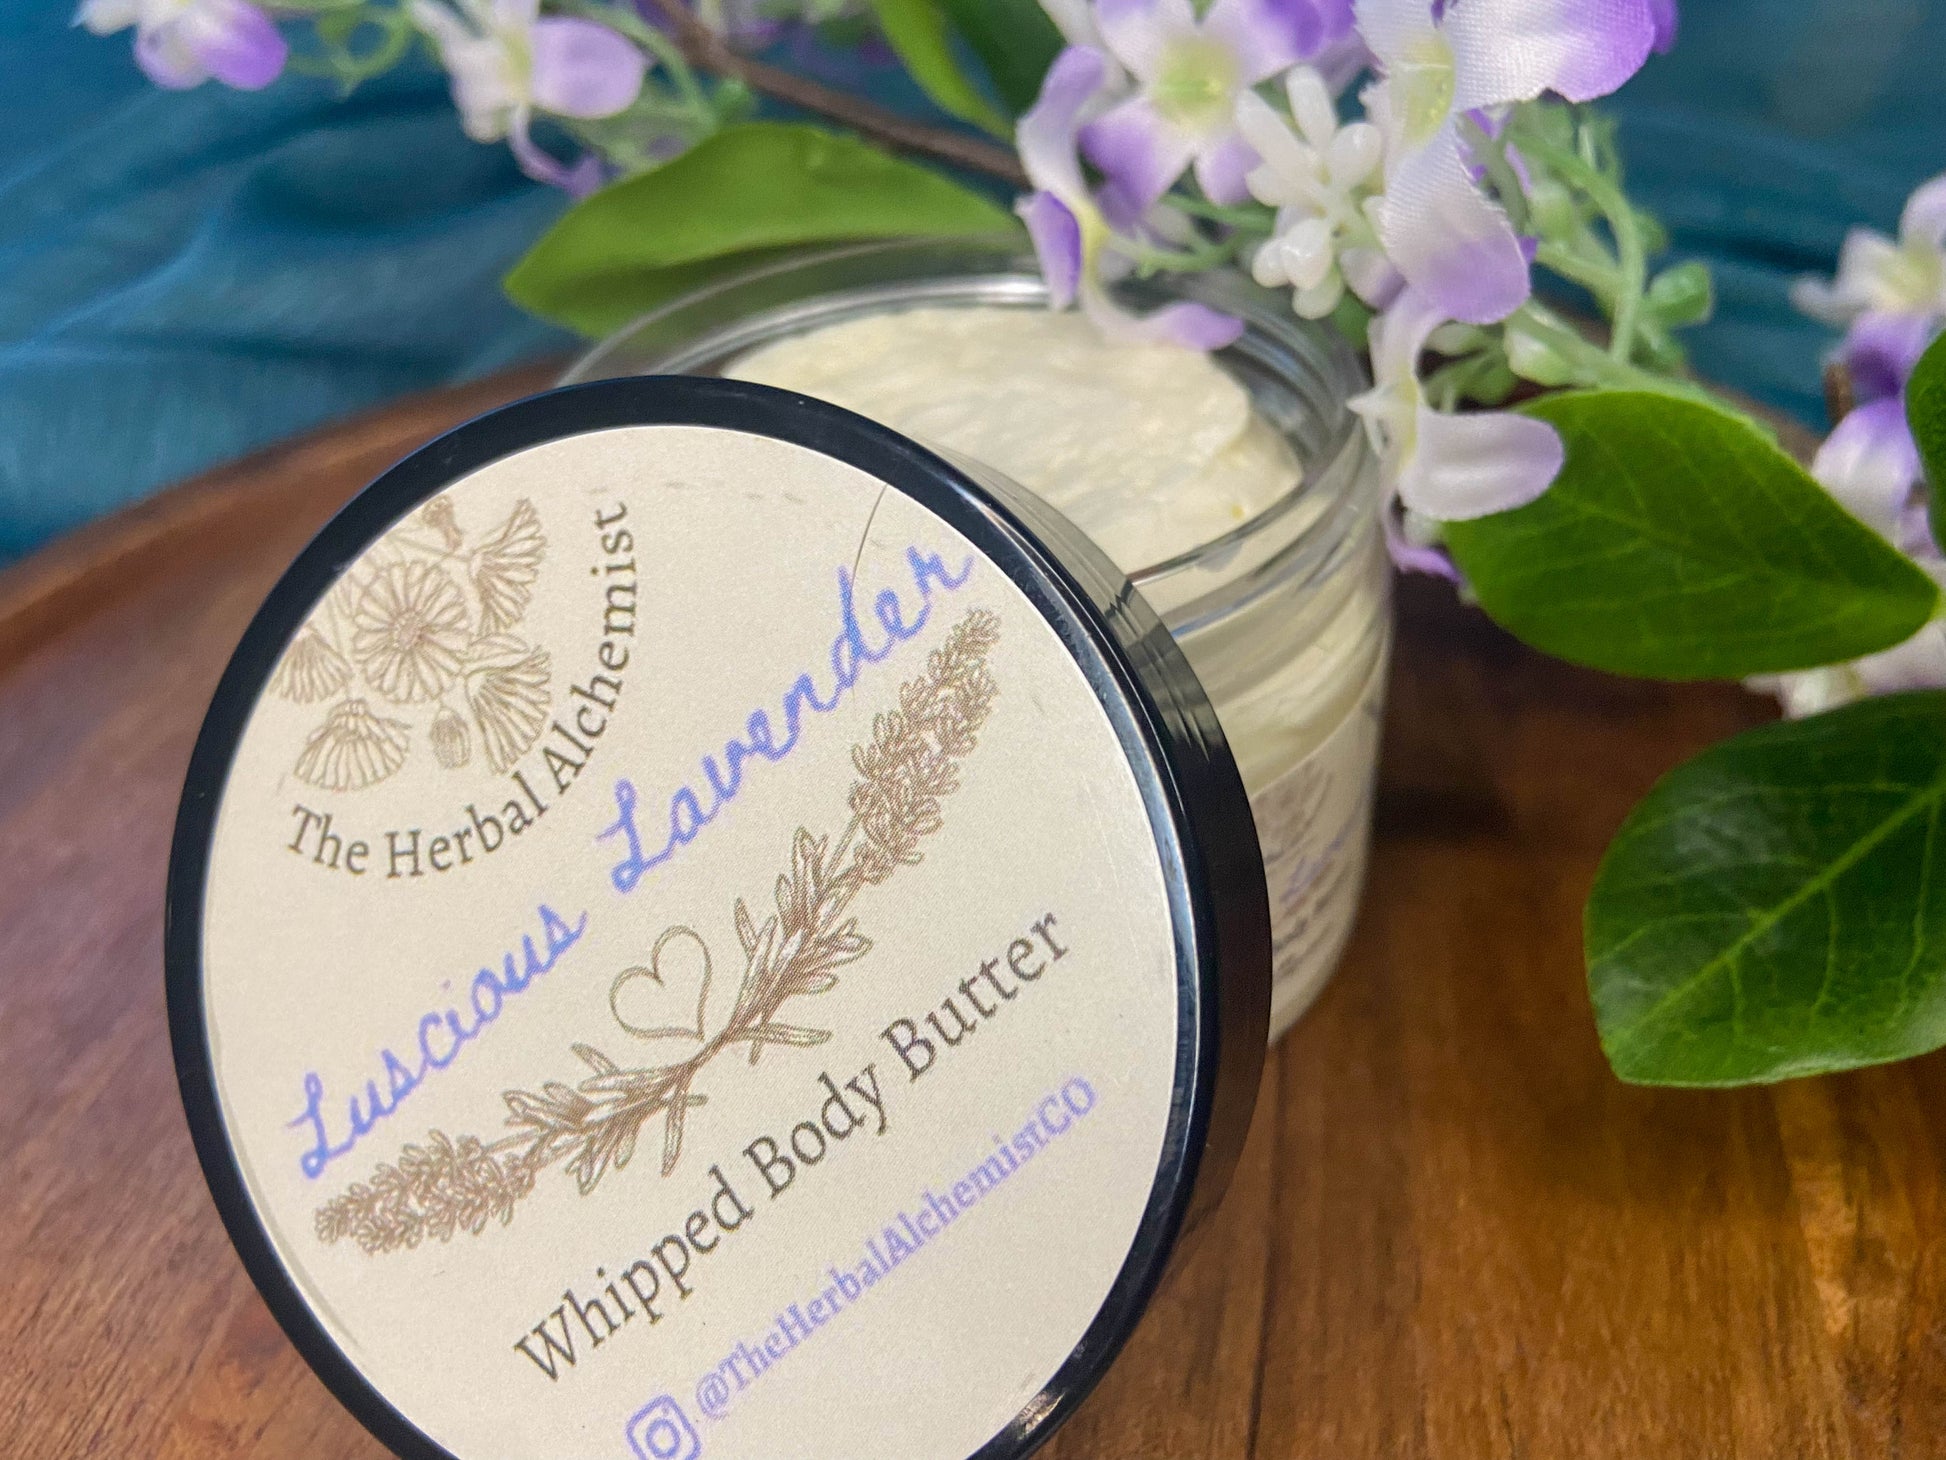 Luscious Lavender Whipped Body Butter - The Herbal Alchemist